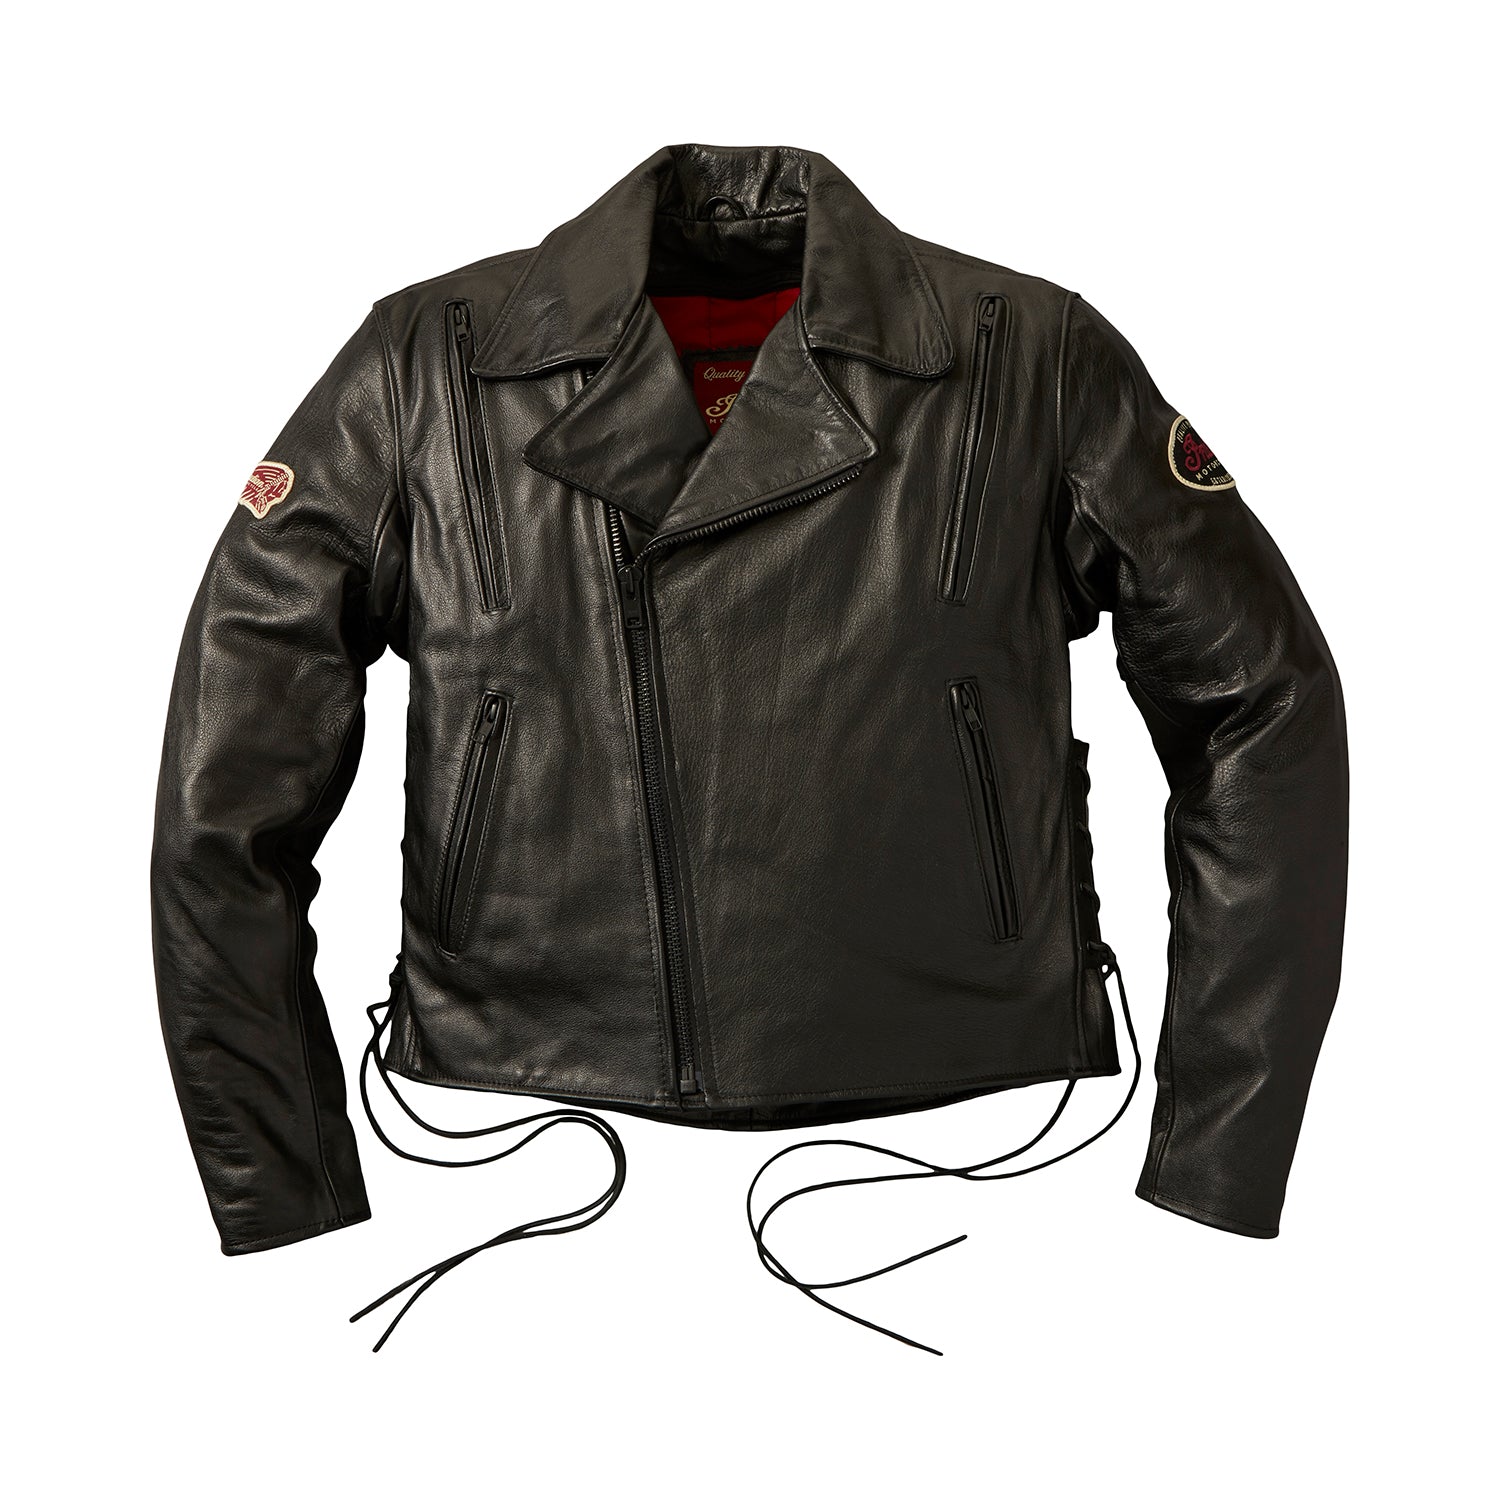 Men's Horsehide Leather Liberty Riding Jacket with Removable Lining, Black